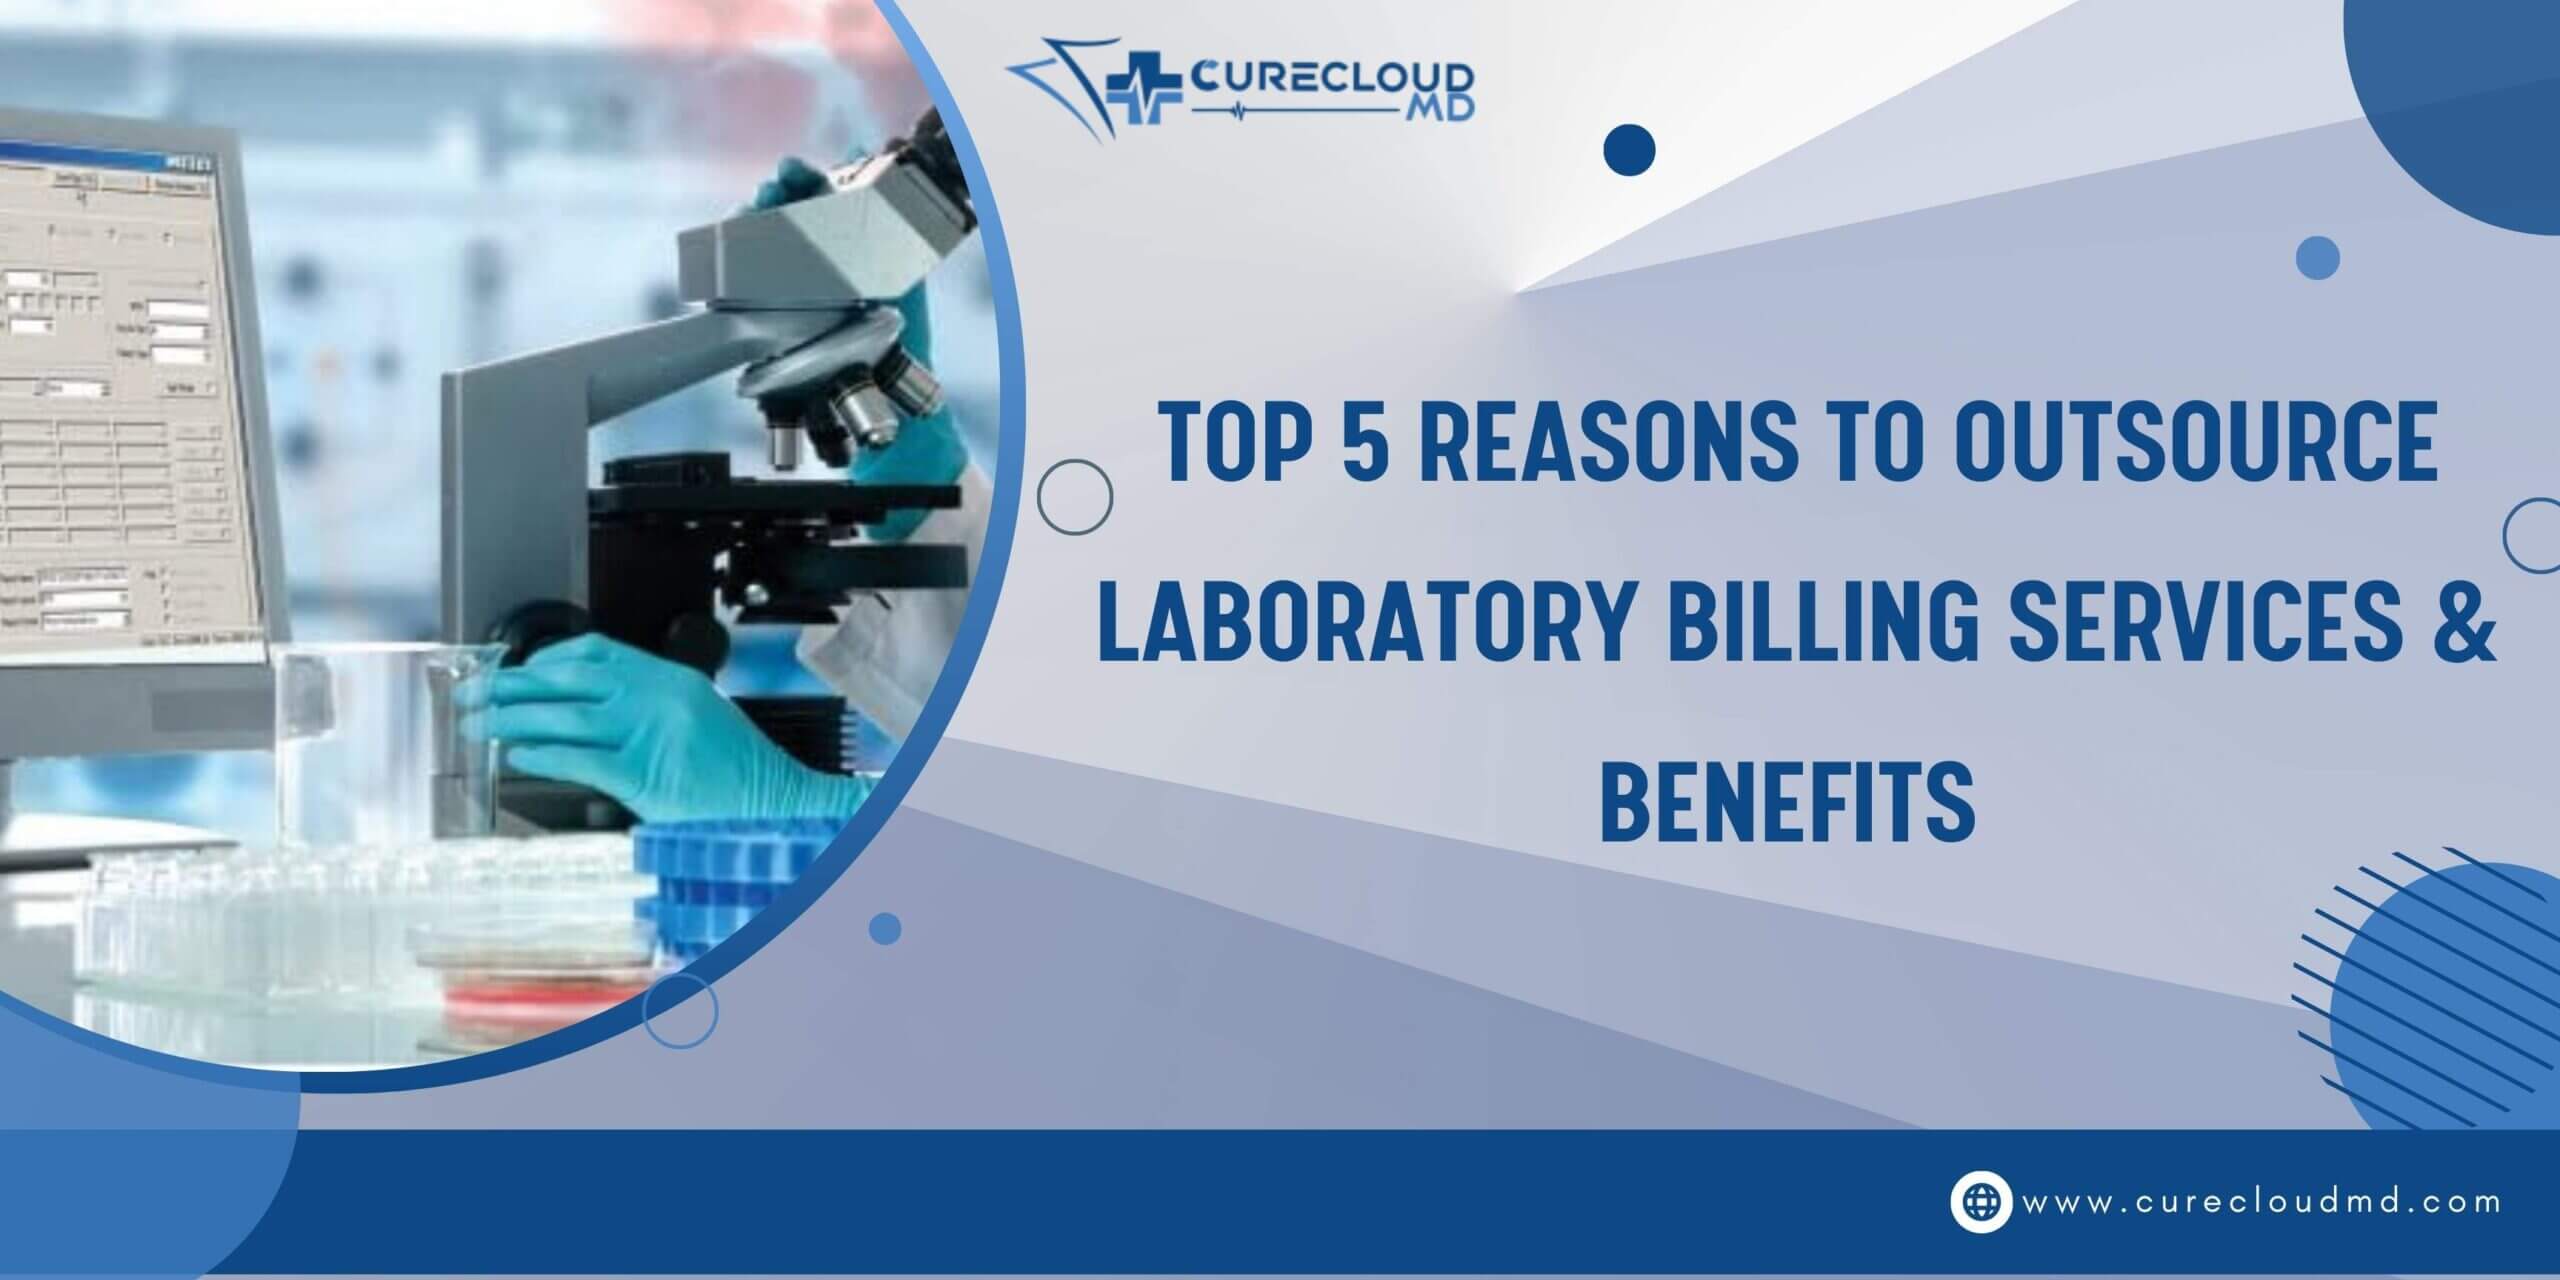 Top 5 Reasons To Outsource Laboratory Billing Services & Benefits It Offers?